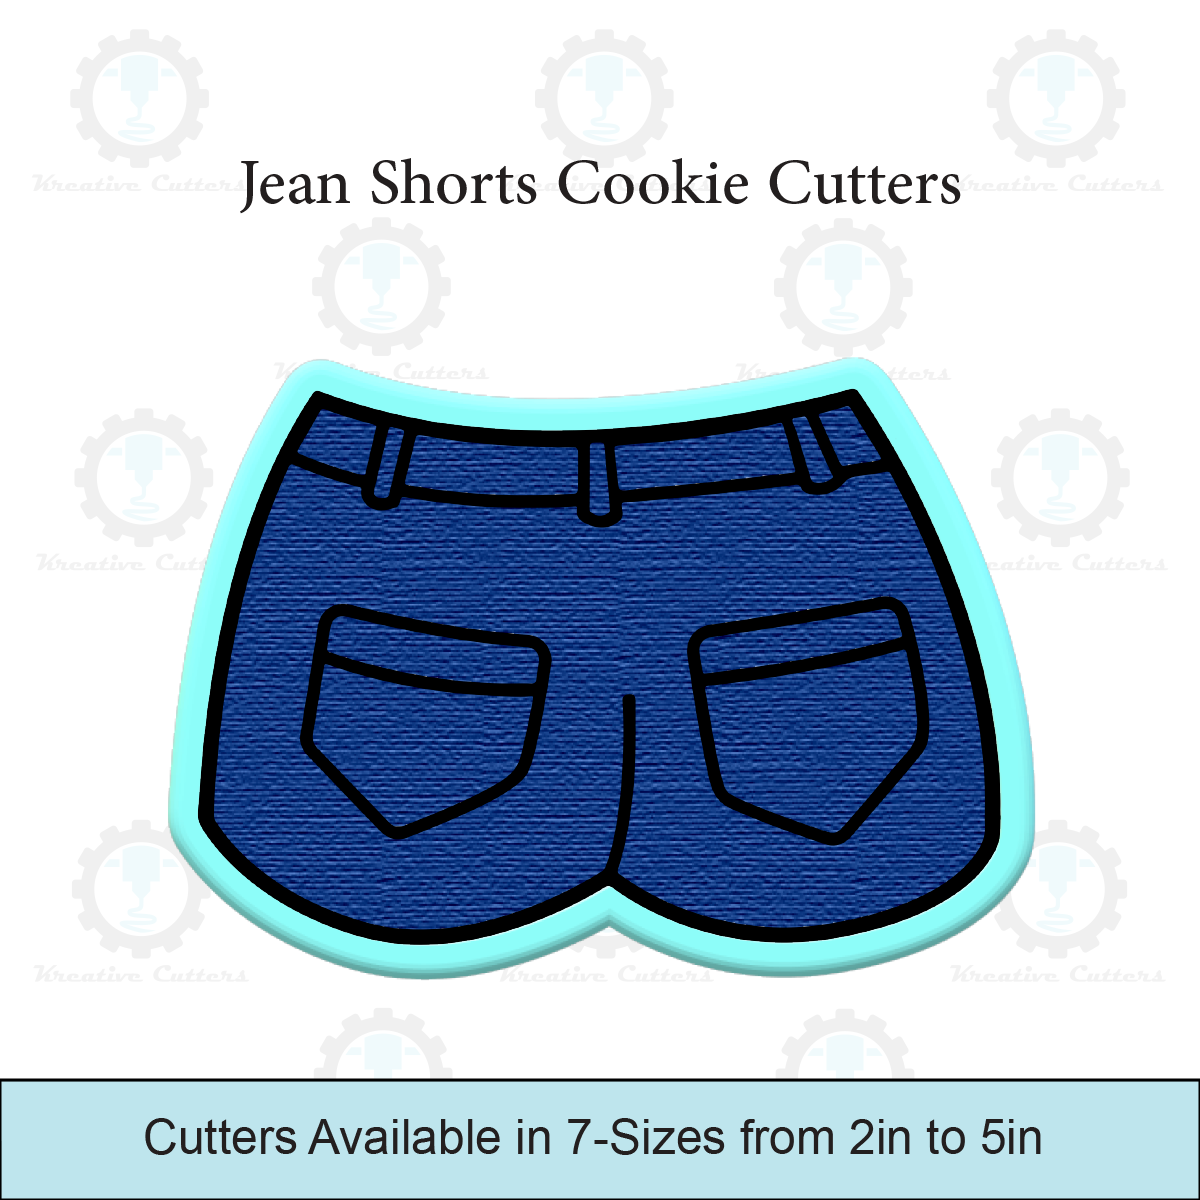 Jean Shorts Cookie Cutters